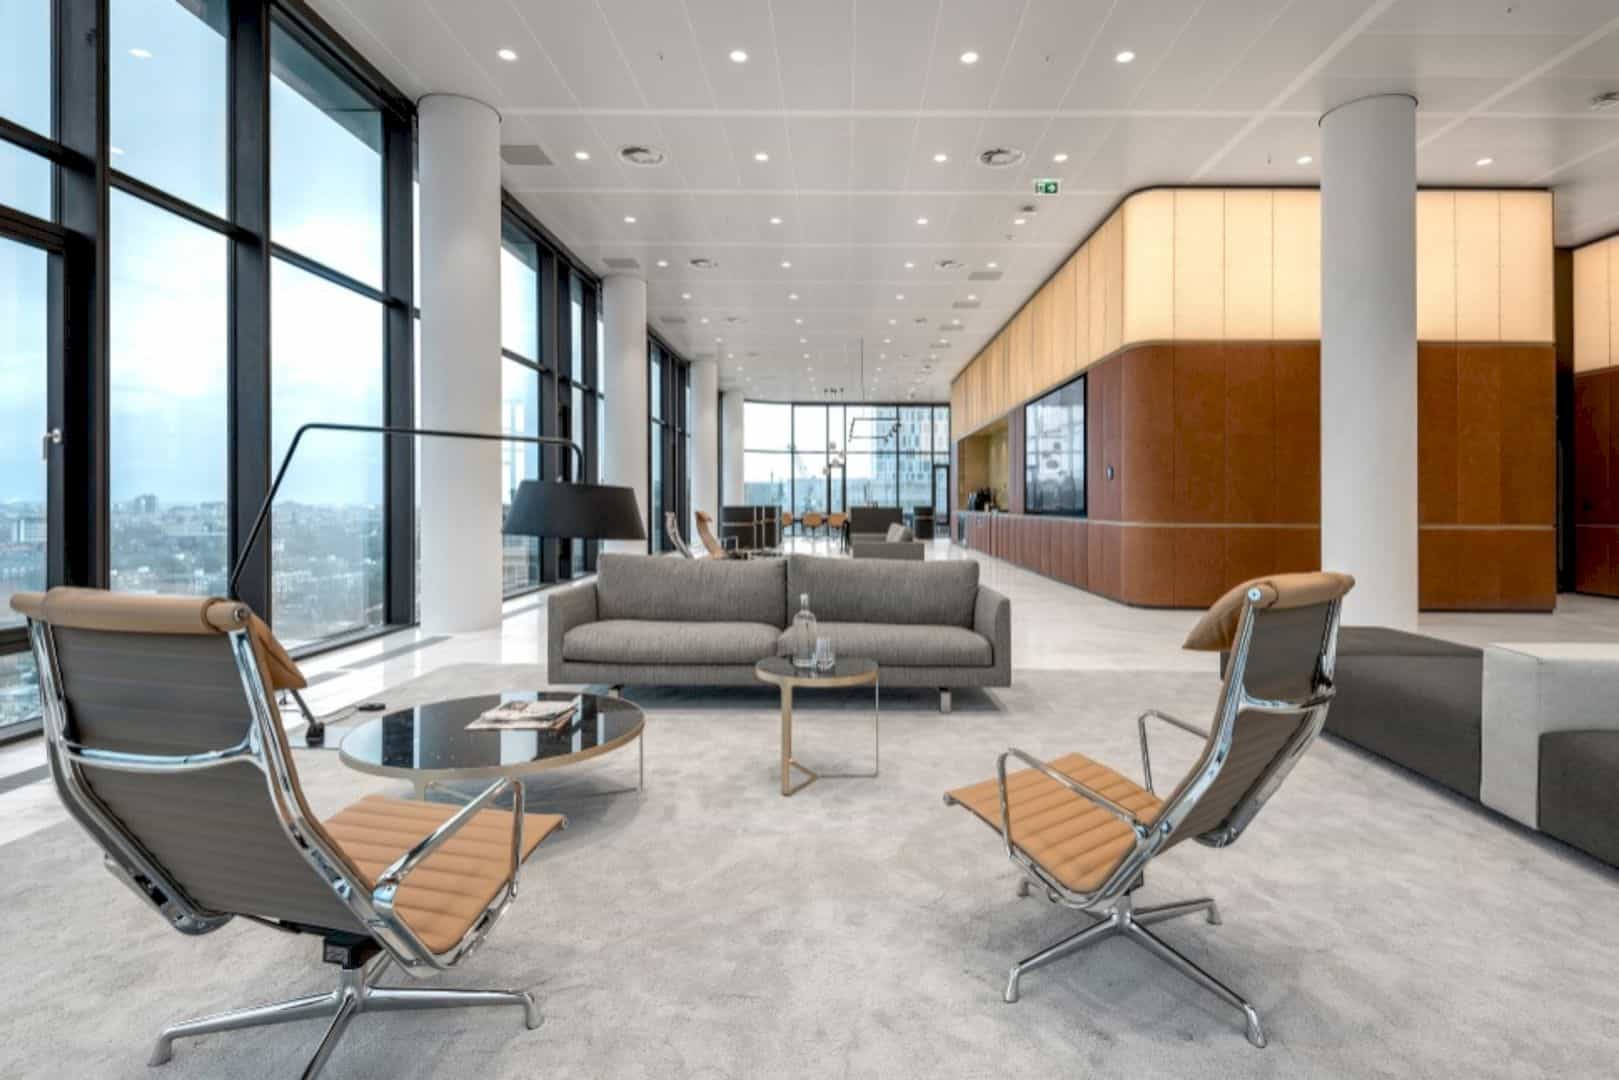 Cms Amsterdam A Warm Natural Base Office Design Merged With Curves And Transparency 15